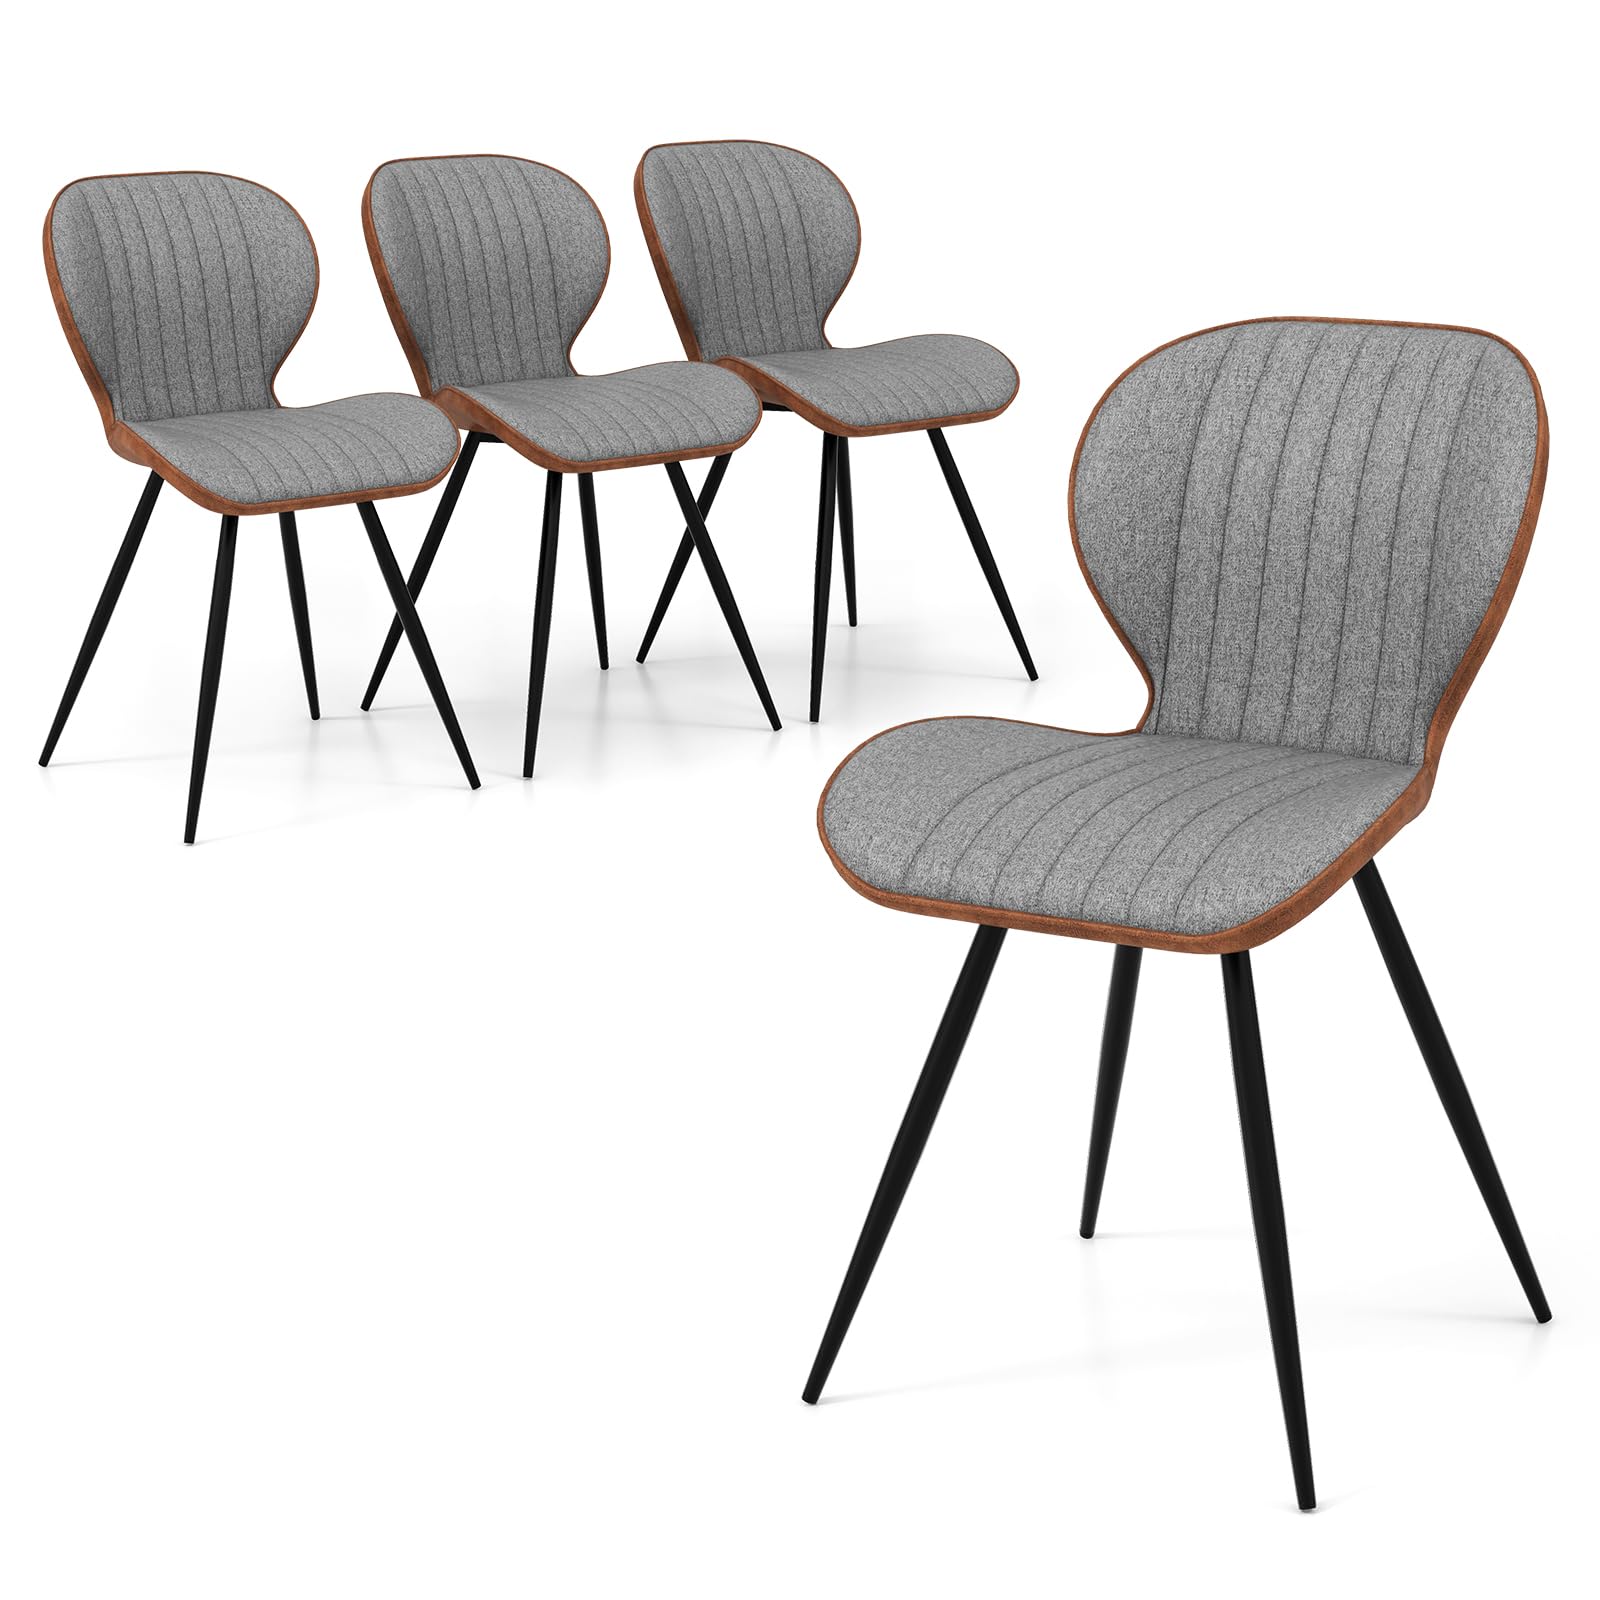 Giantex Upholstered Dining Chairs Set